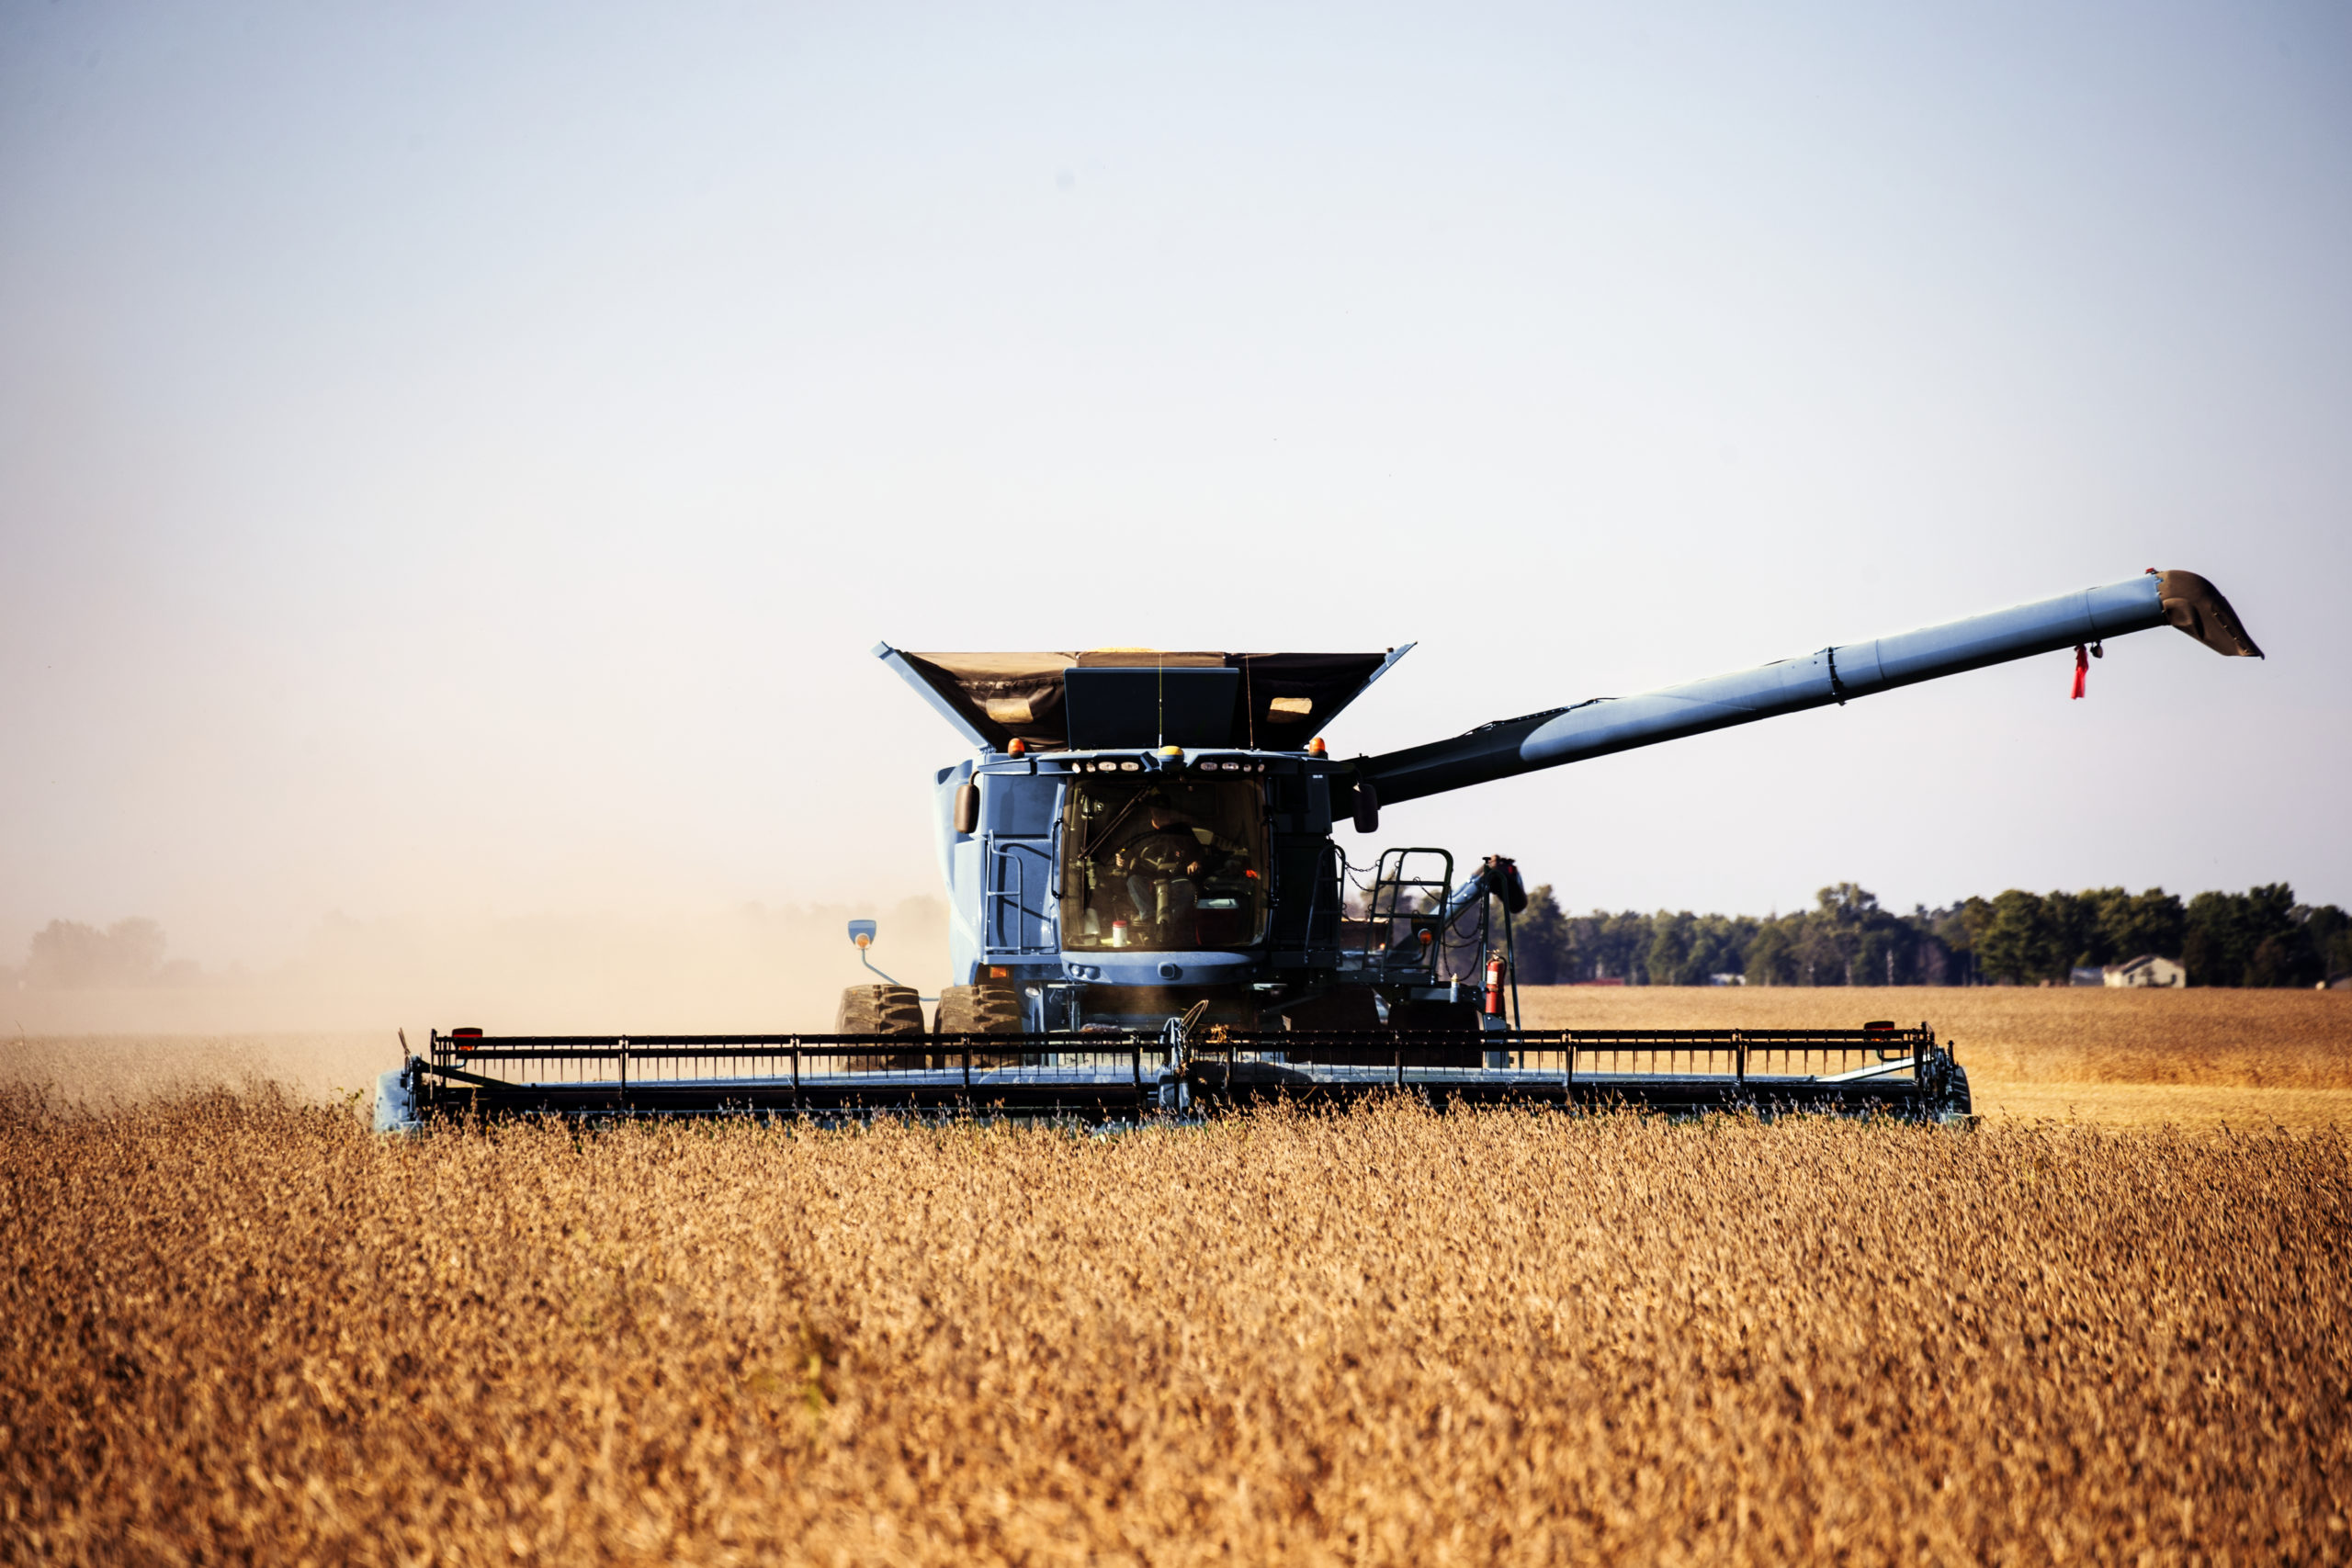 A harvesting operation kicks up dust in rural Carroll County, Indiana. Original image from Carol M. Highsmith’s America, Library of Congress collection. Digitally enhanced by rawpixel.